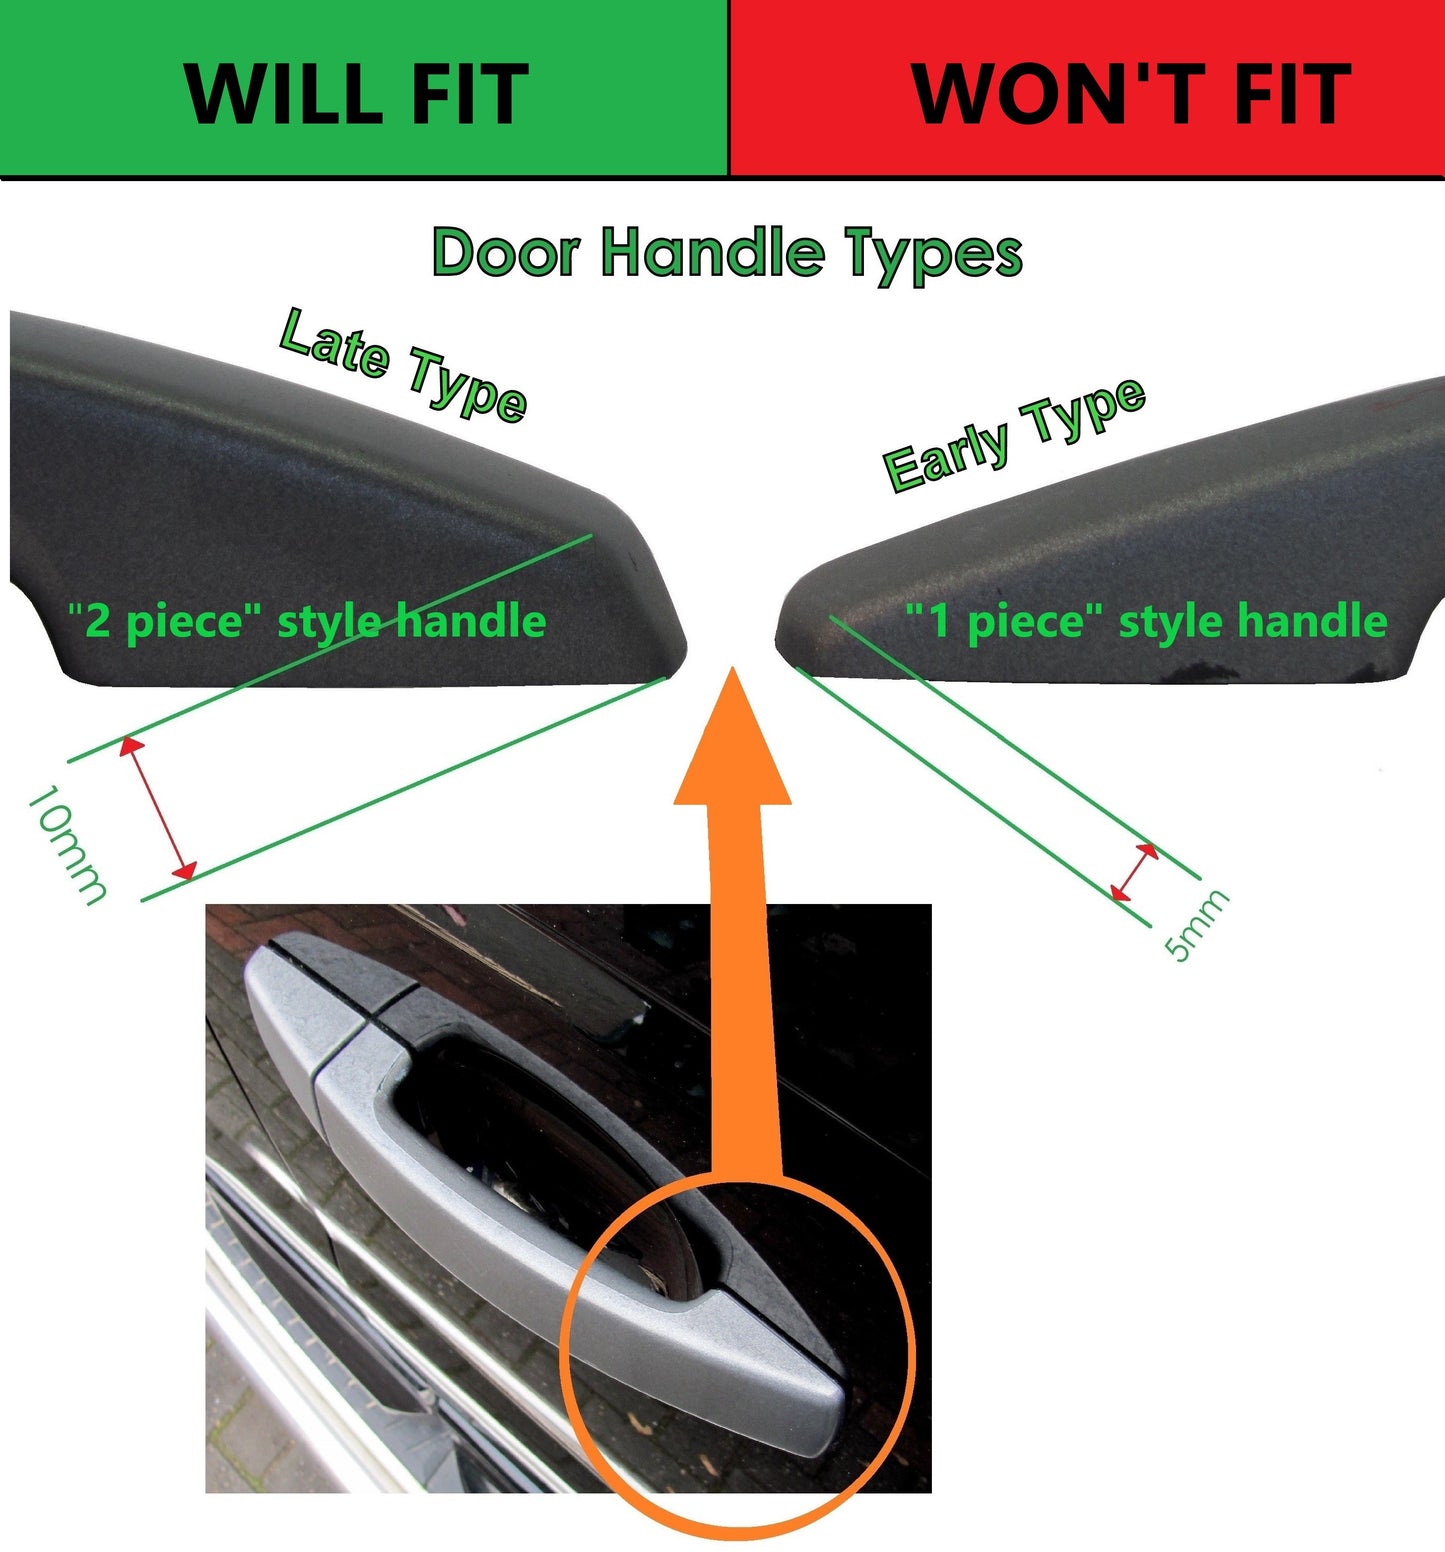 Door Handle "Skins" for Land Rover Freelander 2 fitted with 2 pc Handle - Rimini Red